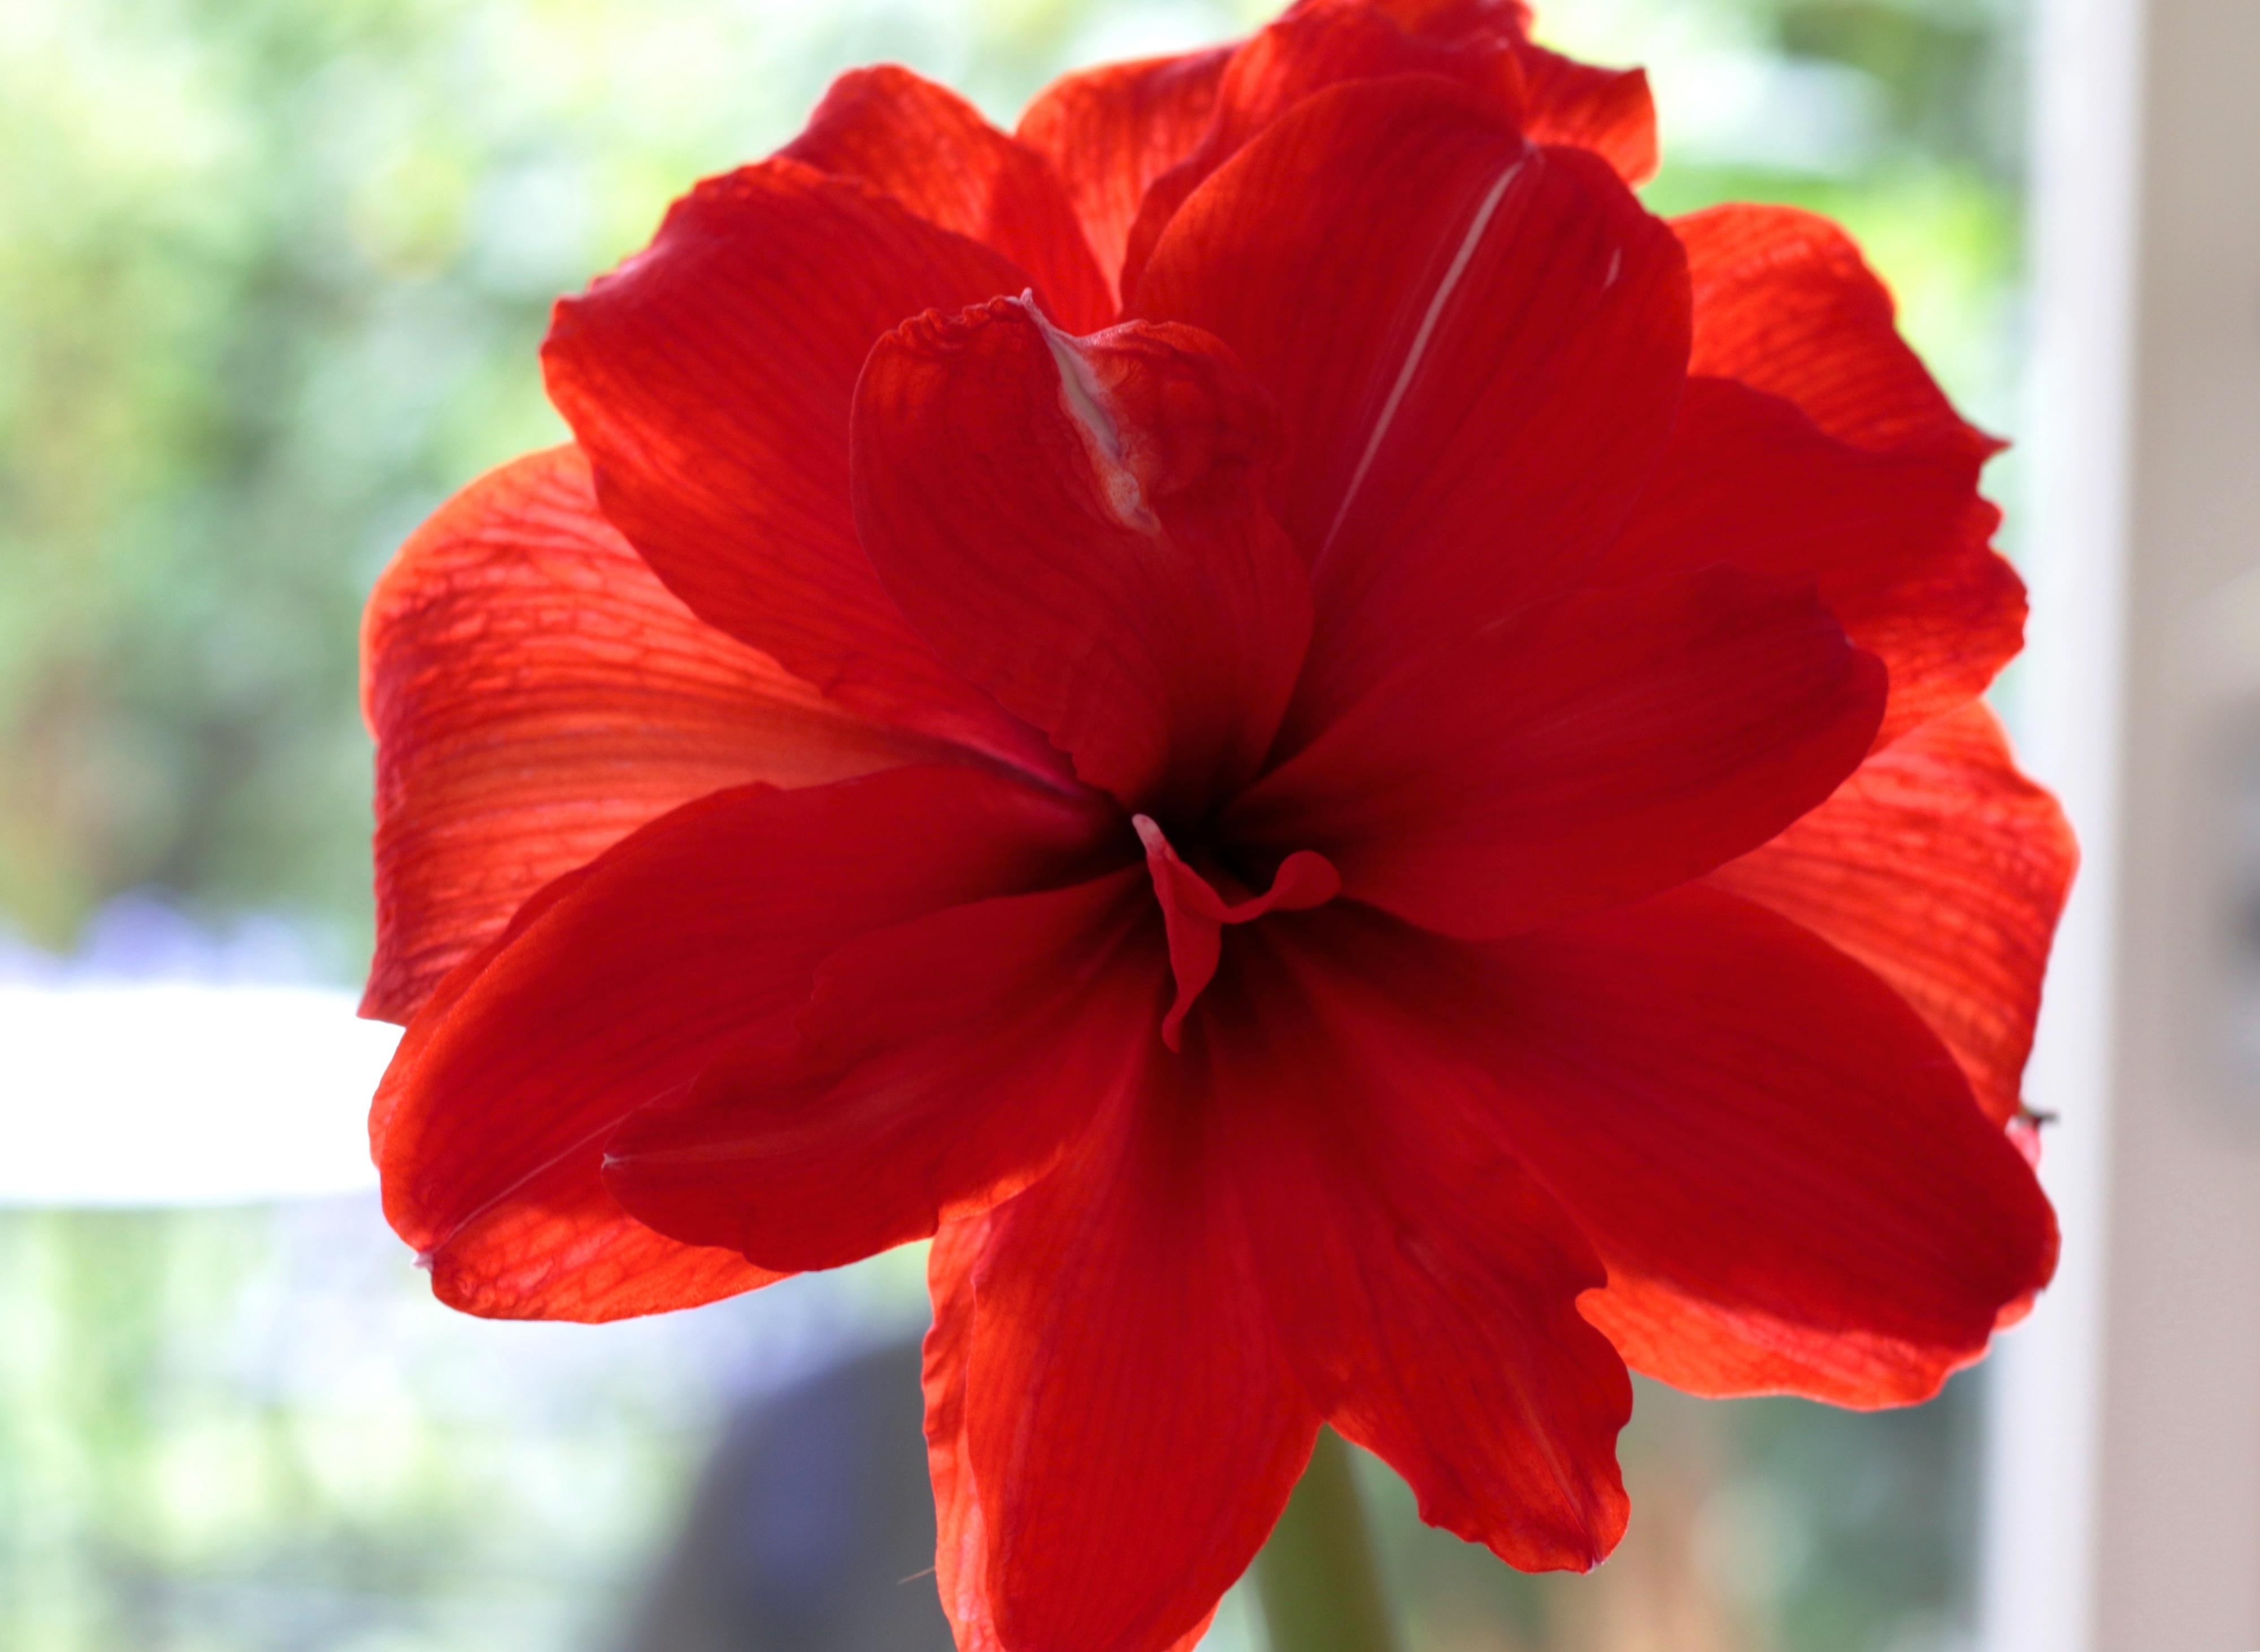 Hippeastrum Holland 'Double King' - Amaryllis (Shipping begins Oct. 2021) from Leo Berbee Bulb Company